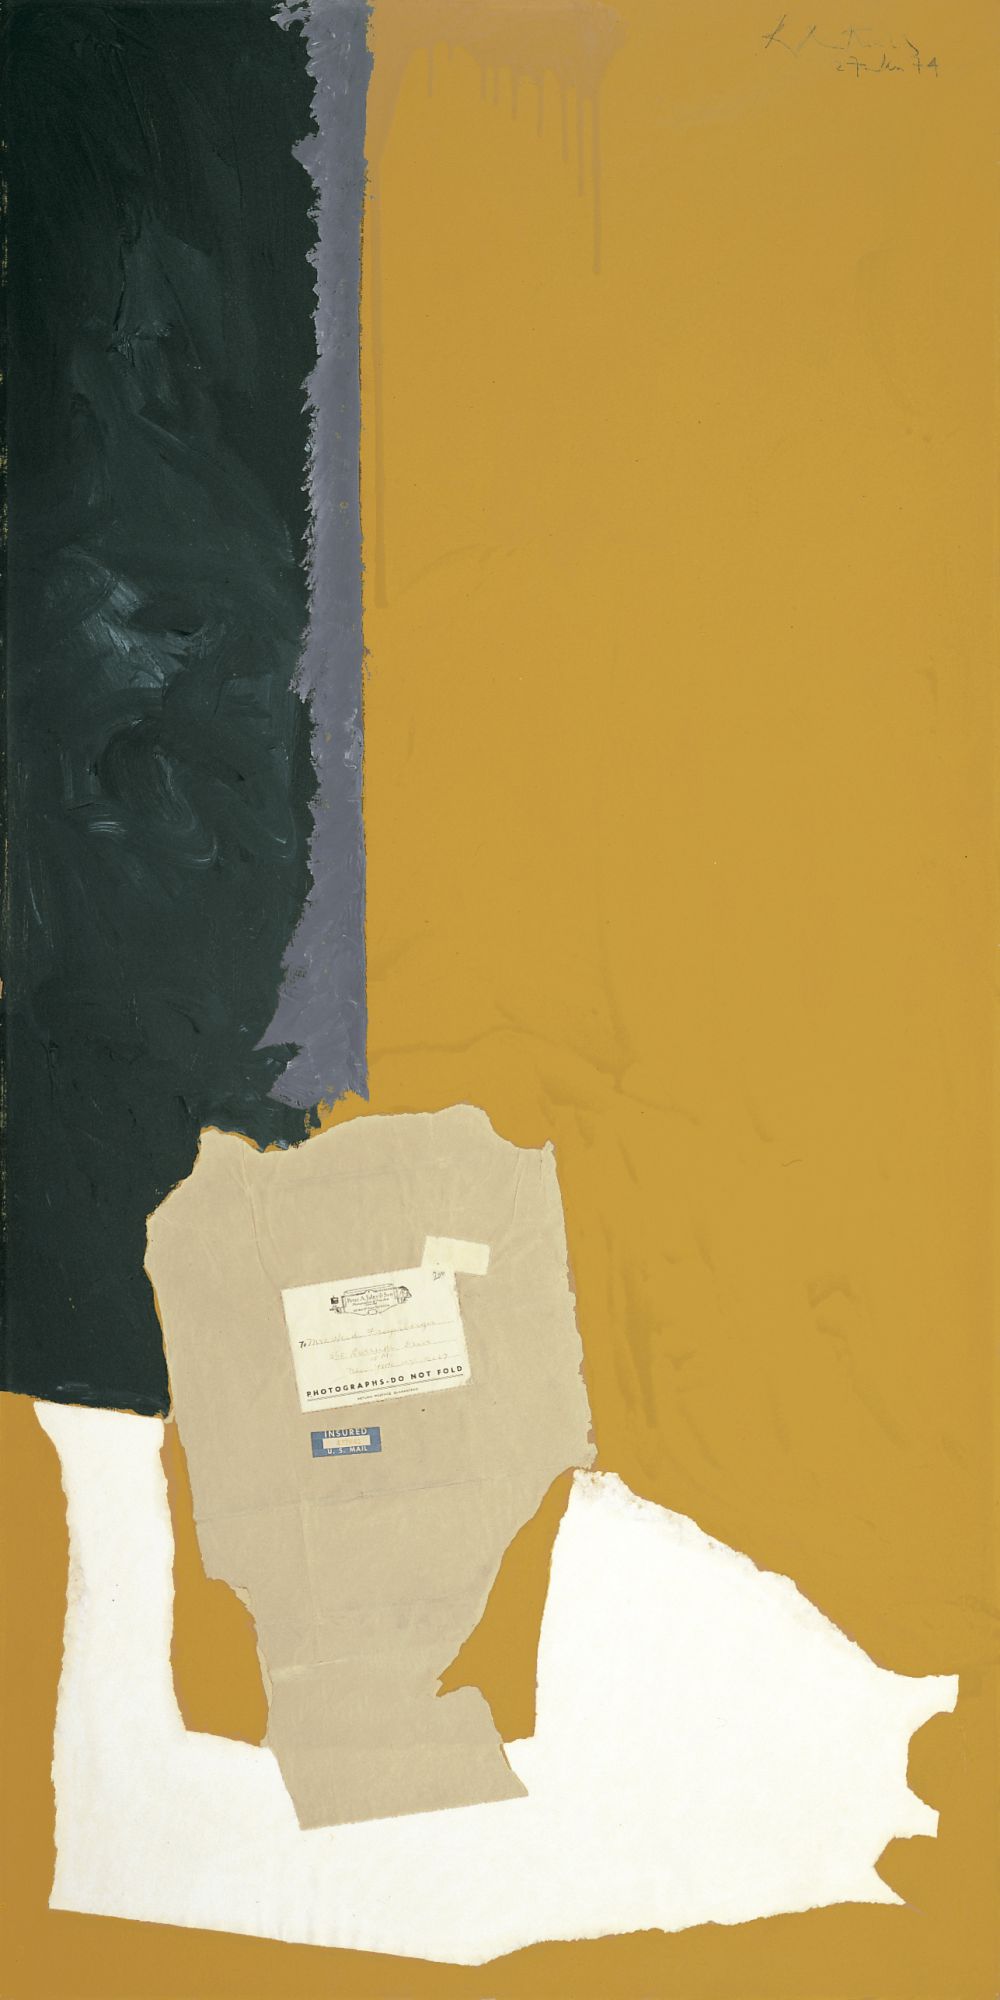 Heidi and Claus, 1974. Acrylic and pasted papers on Upson board, 72 x 36 inches (192.9 x 91/4 cm)